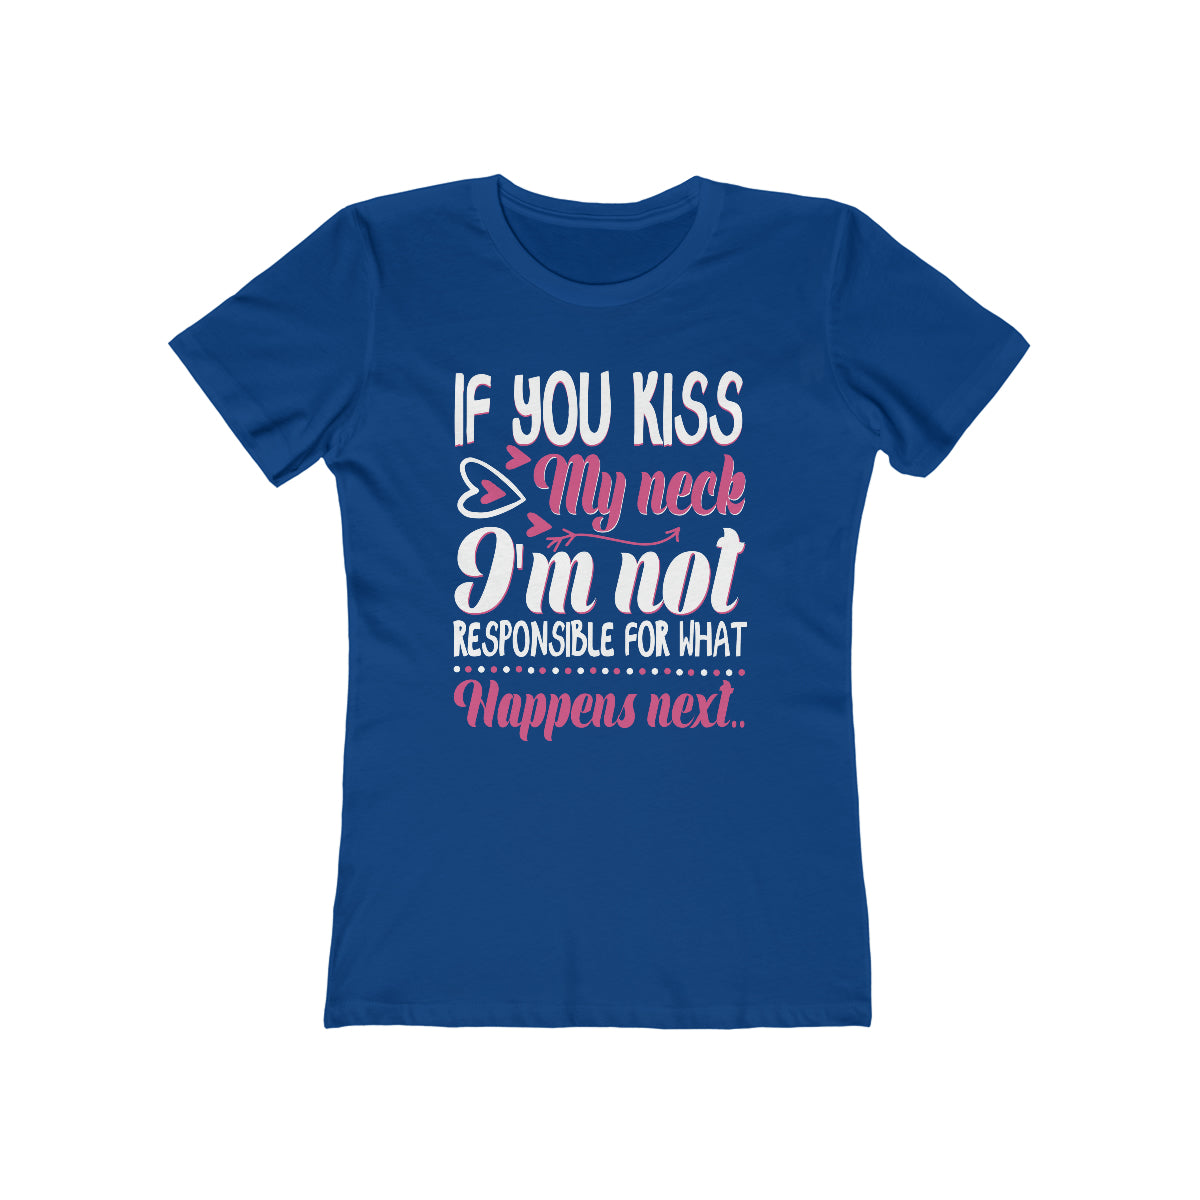 If You Kiss My Neck I'm Not Responsible For What Happens Next - Women's T-shirt